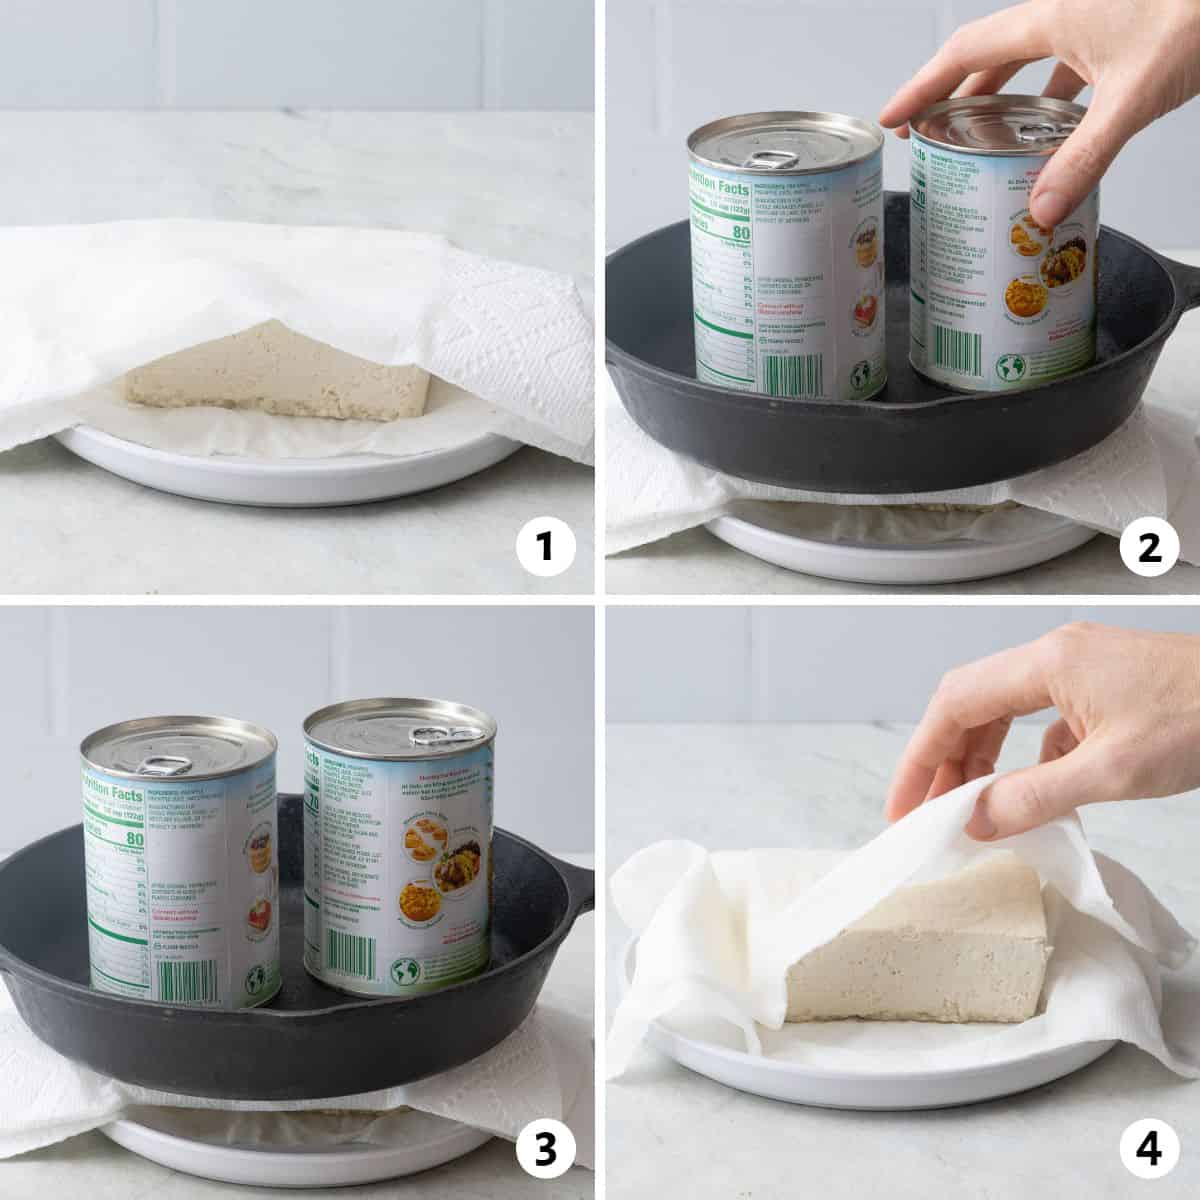 4 image collage preparing recipe: 1- tofu between two paper towels on a shallow plate, 2- cast iron ontop of paper towel covered tofu with 2 cans being added, 3- pan with cans on top of tofu left to sit and press it, 4- hand lifting up paper towel to show pressed tofu.